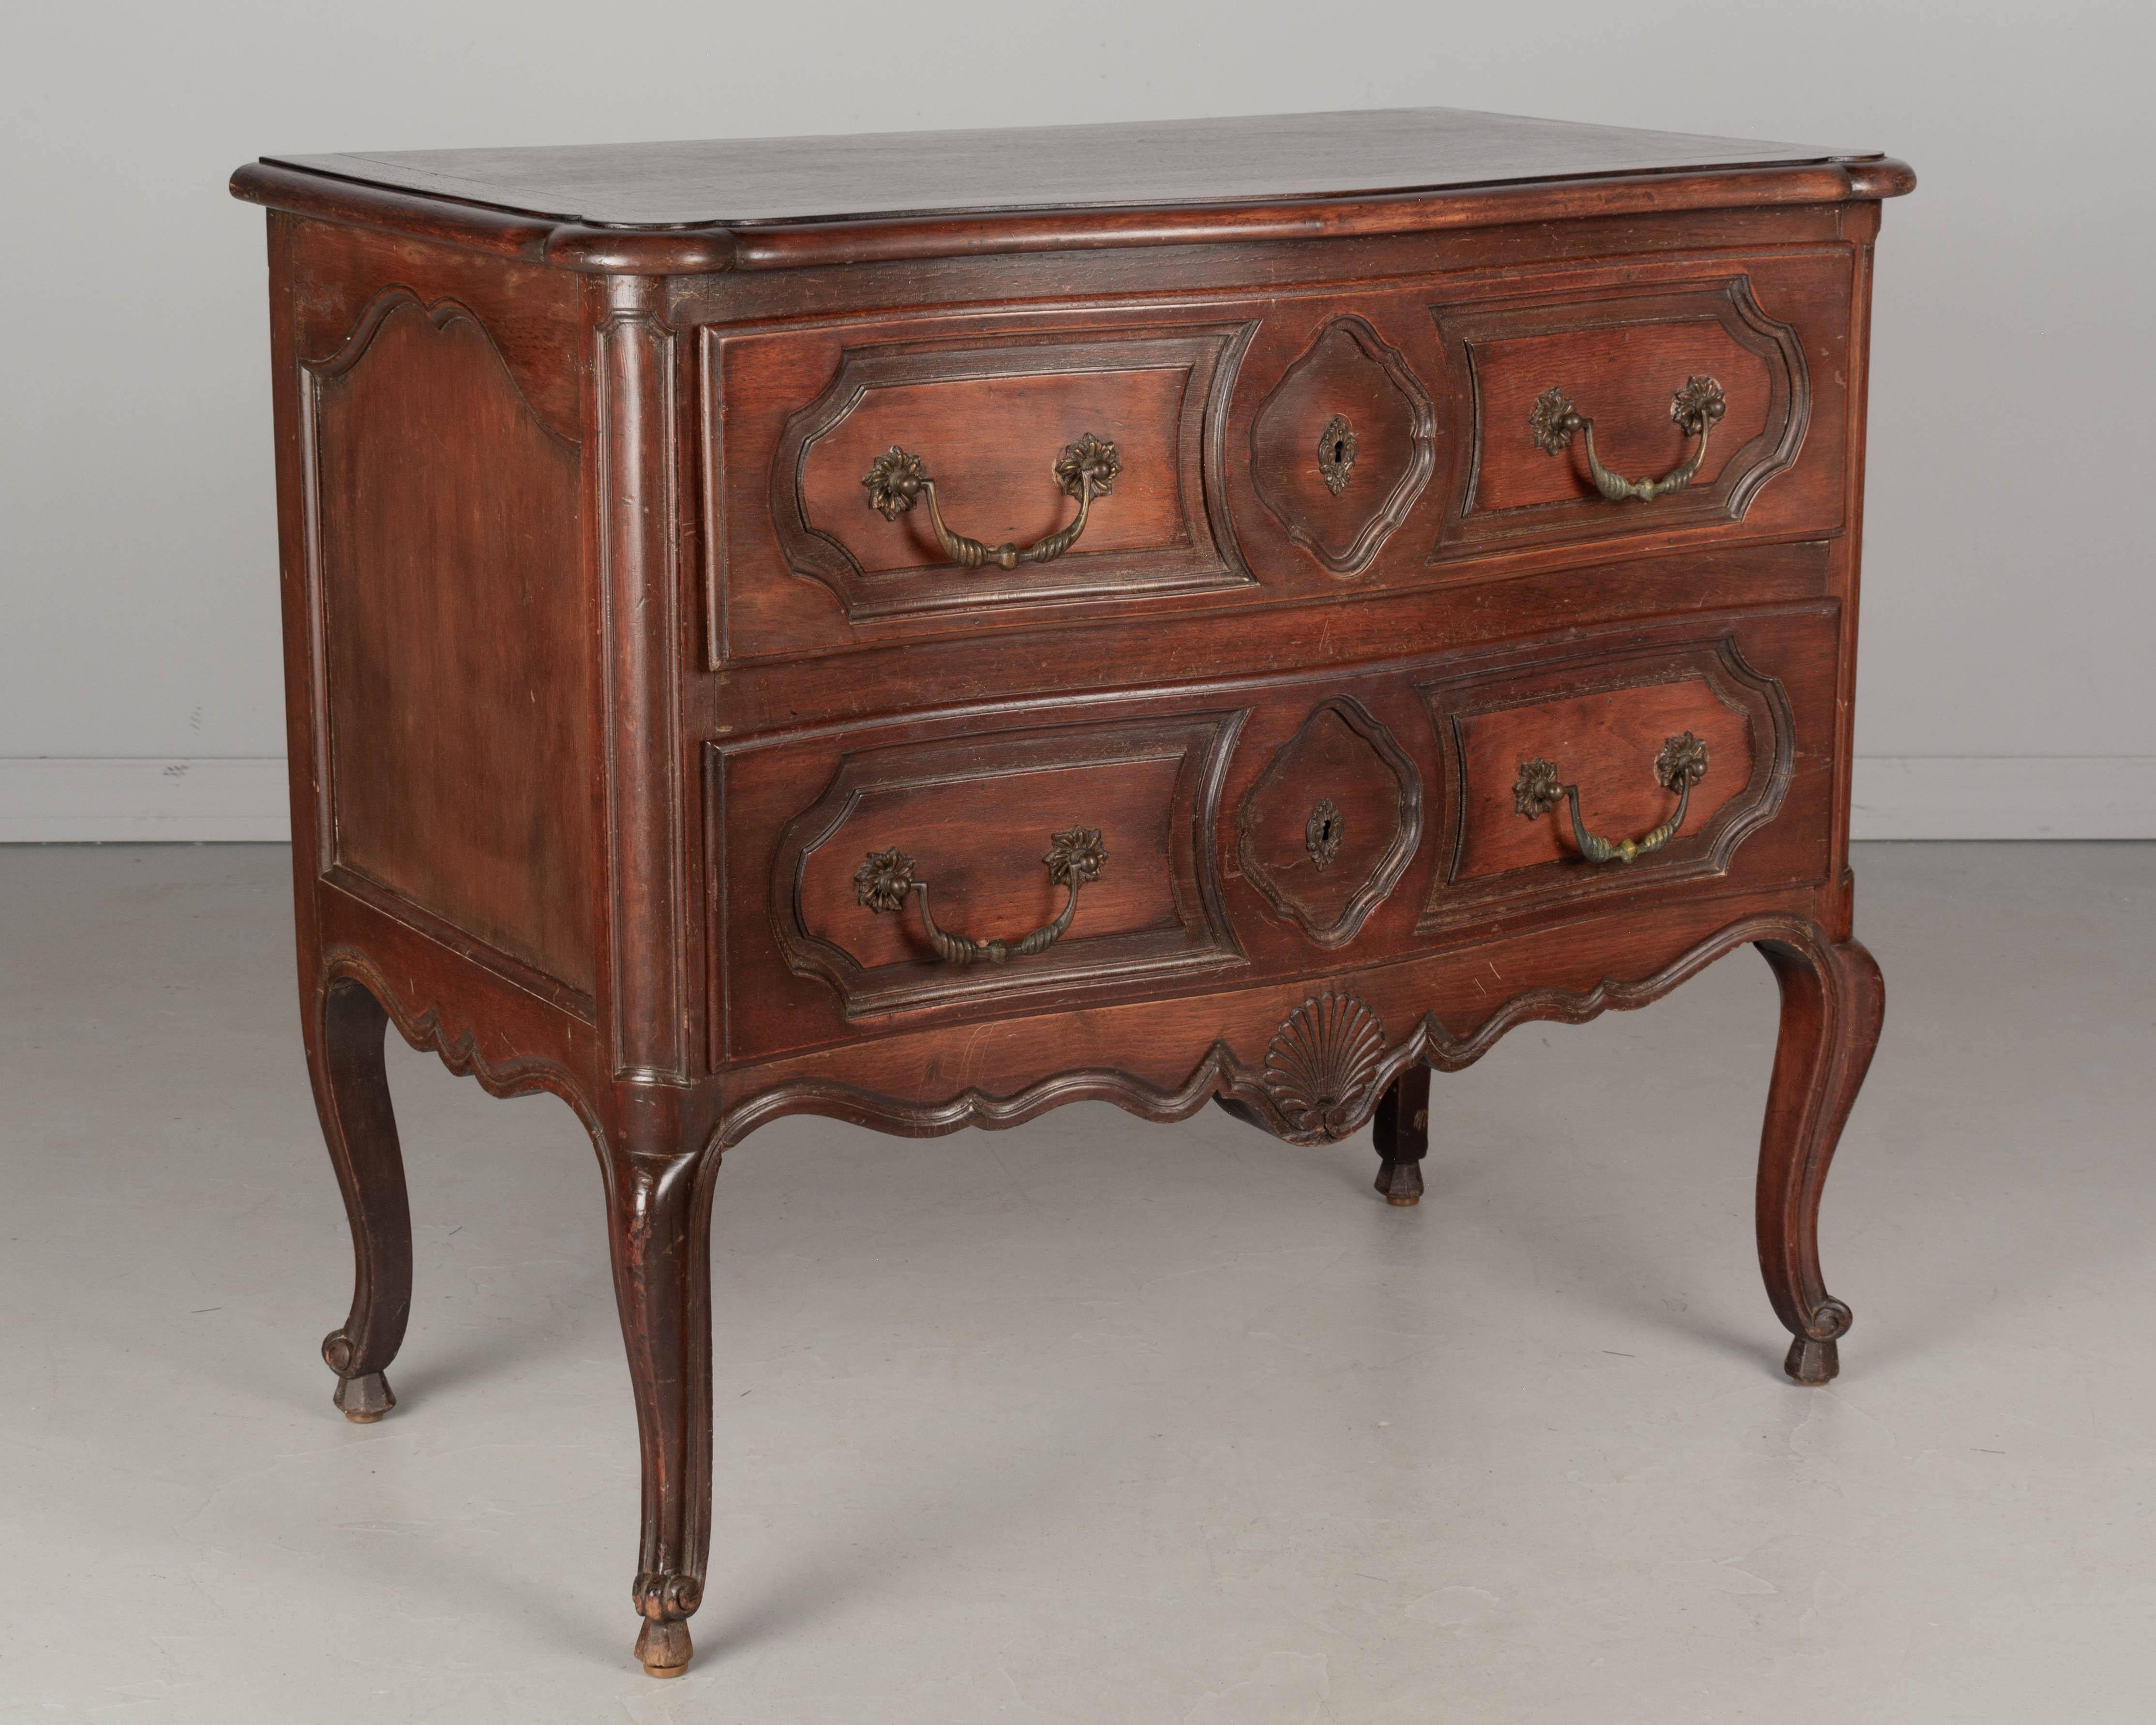 A French Louis XV style commode with serpentine front made of solid walnut with walnut veneer top and oak as a secondary wood. Two dovetailed drawers with brass hardware, no key. A nice vintage chest in good condition. Circa 1950s. Could be used for